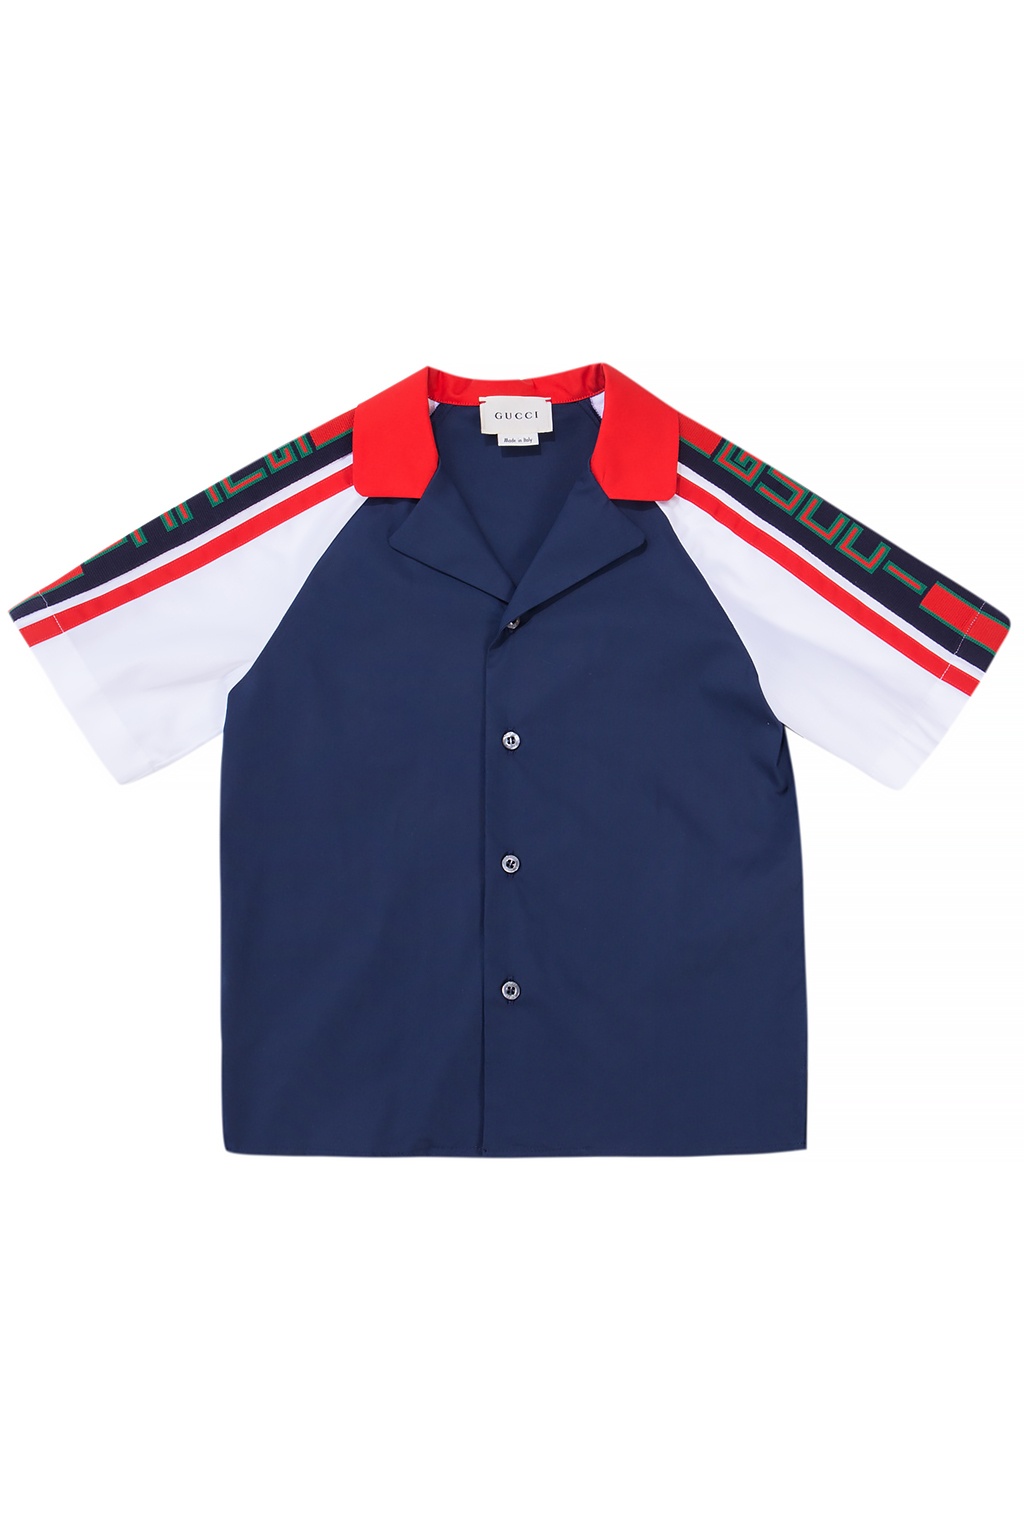 red white and blue gucci shirt